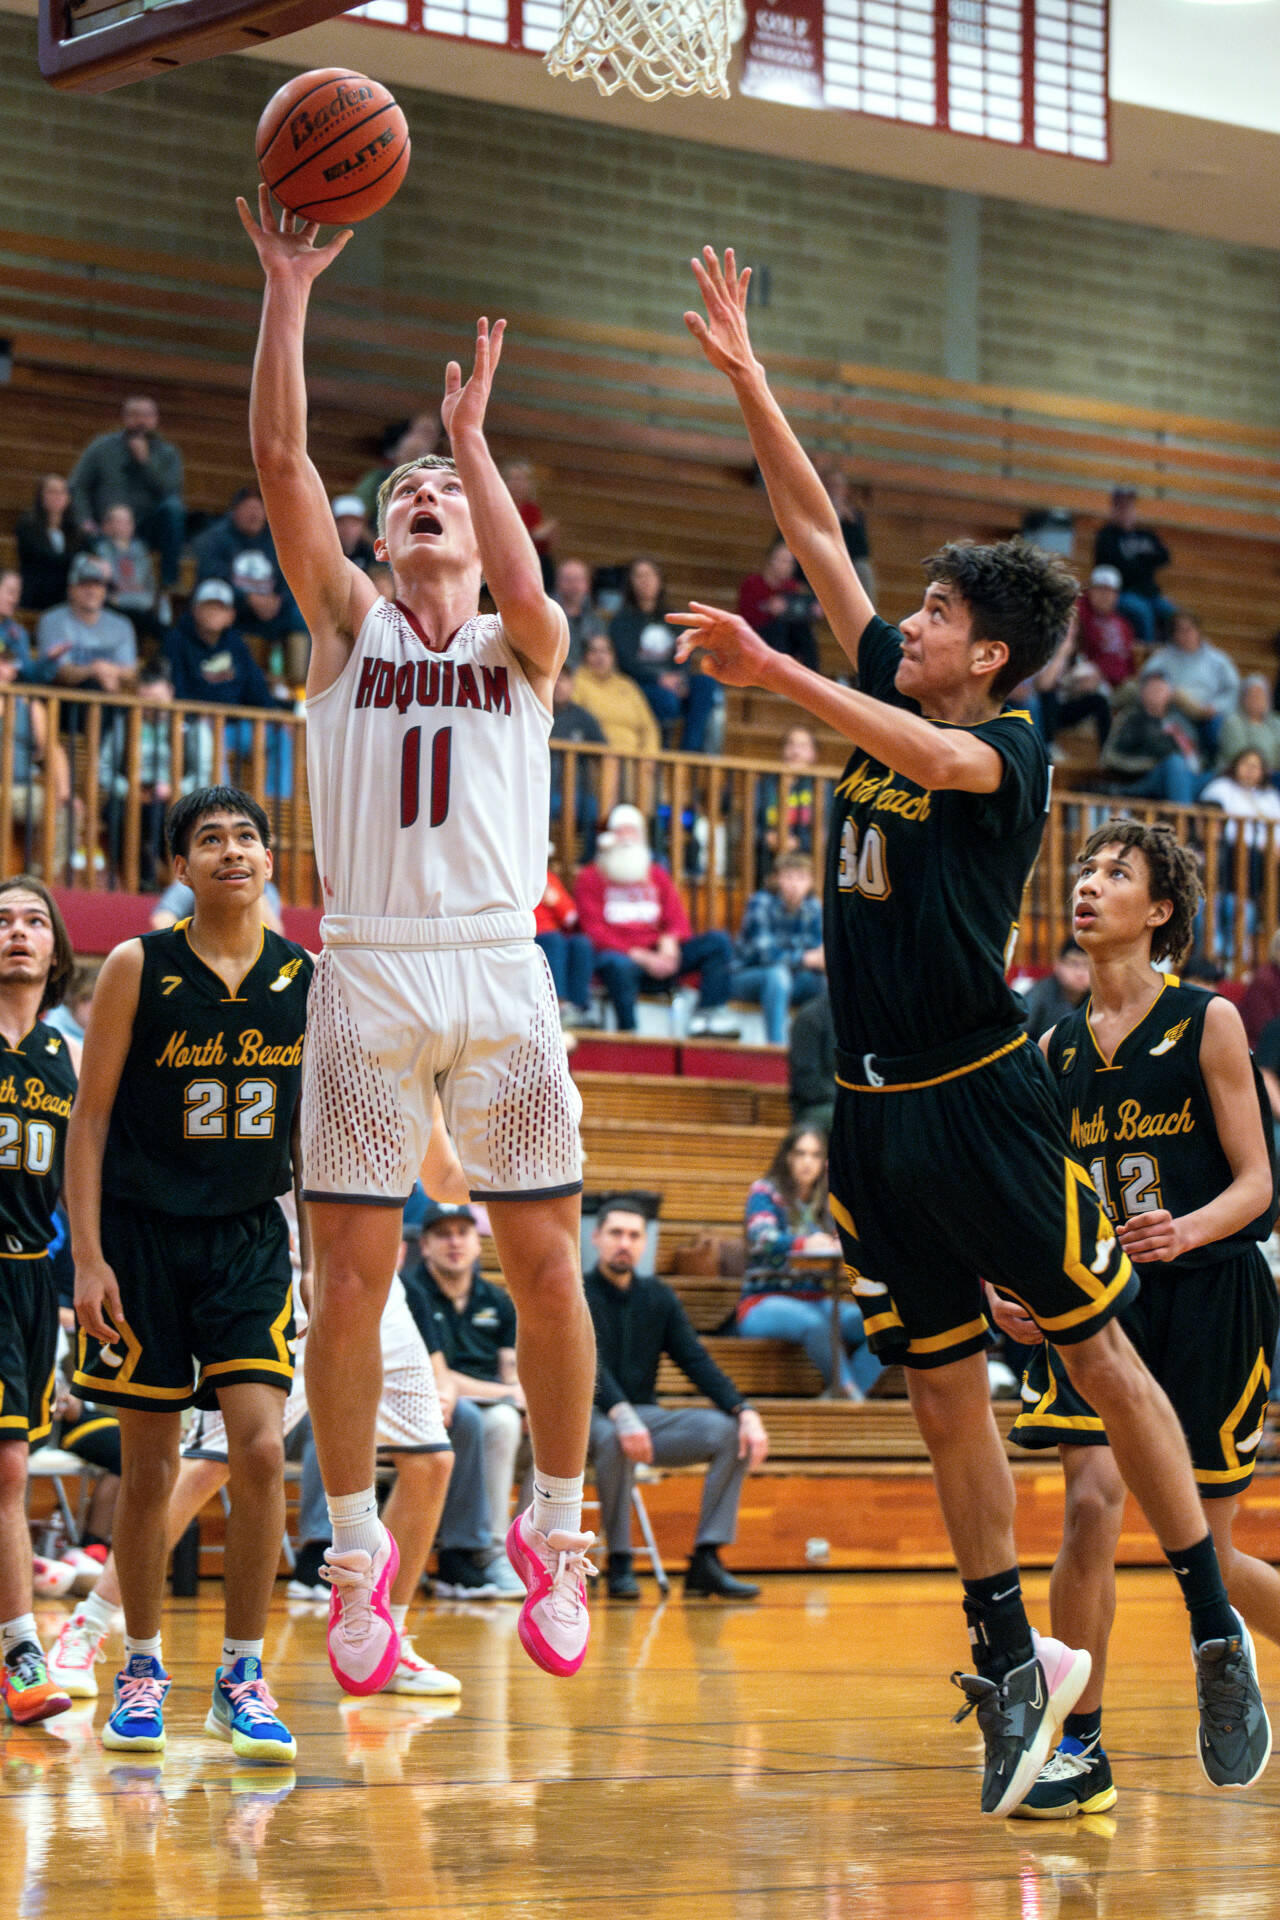 PHOTO BY FOREST WORGUM Hoquiam senior Zander Jump (11) puts up a shot against North Beach’s Jeremiah Eastman during the Grizzlies’ 71-31 victory on Thursday at Hoquiam Square Garden.